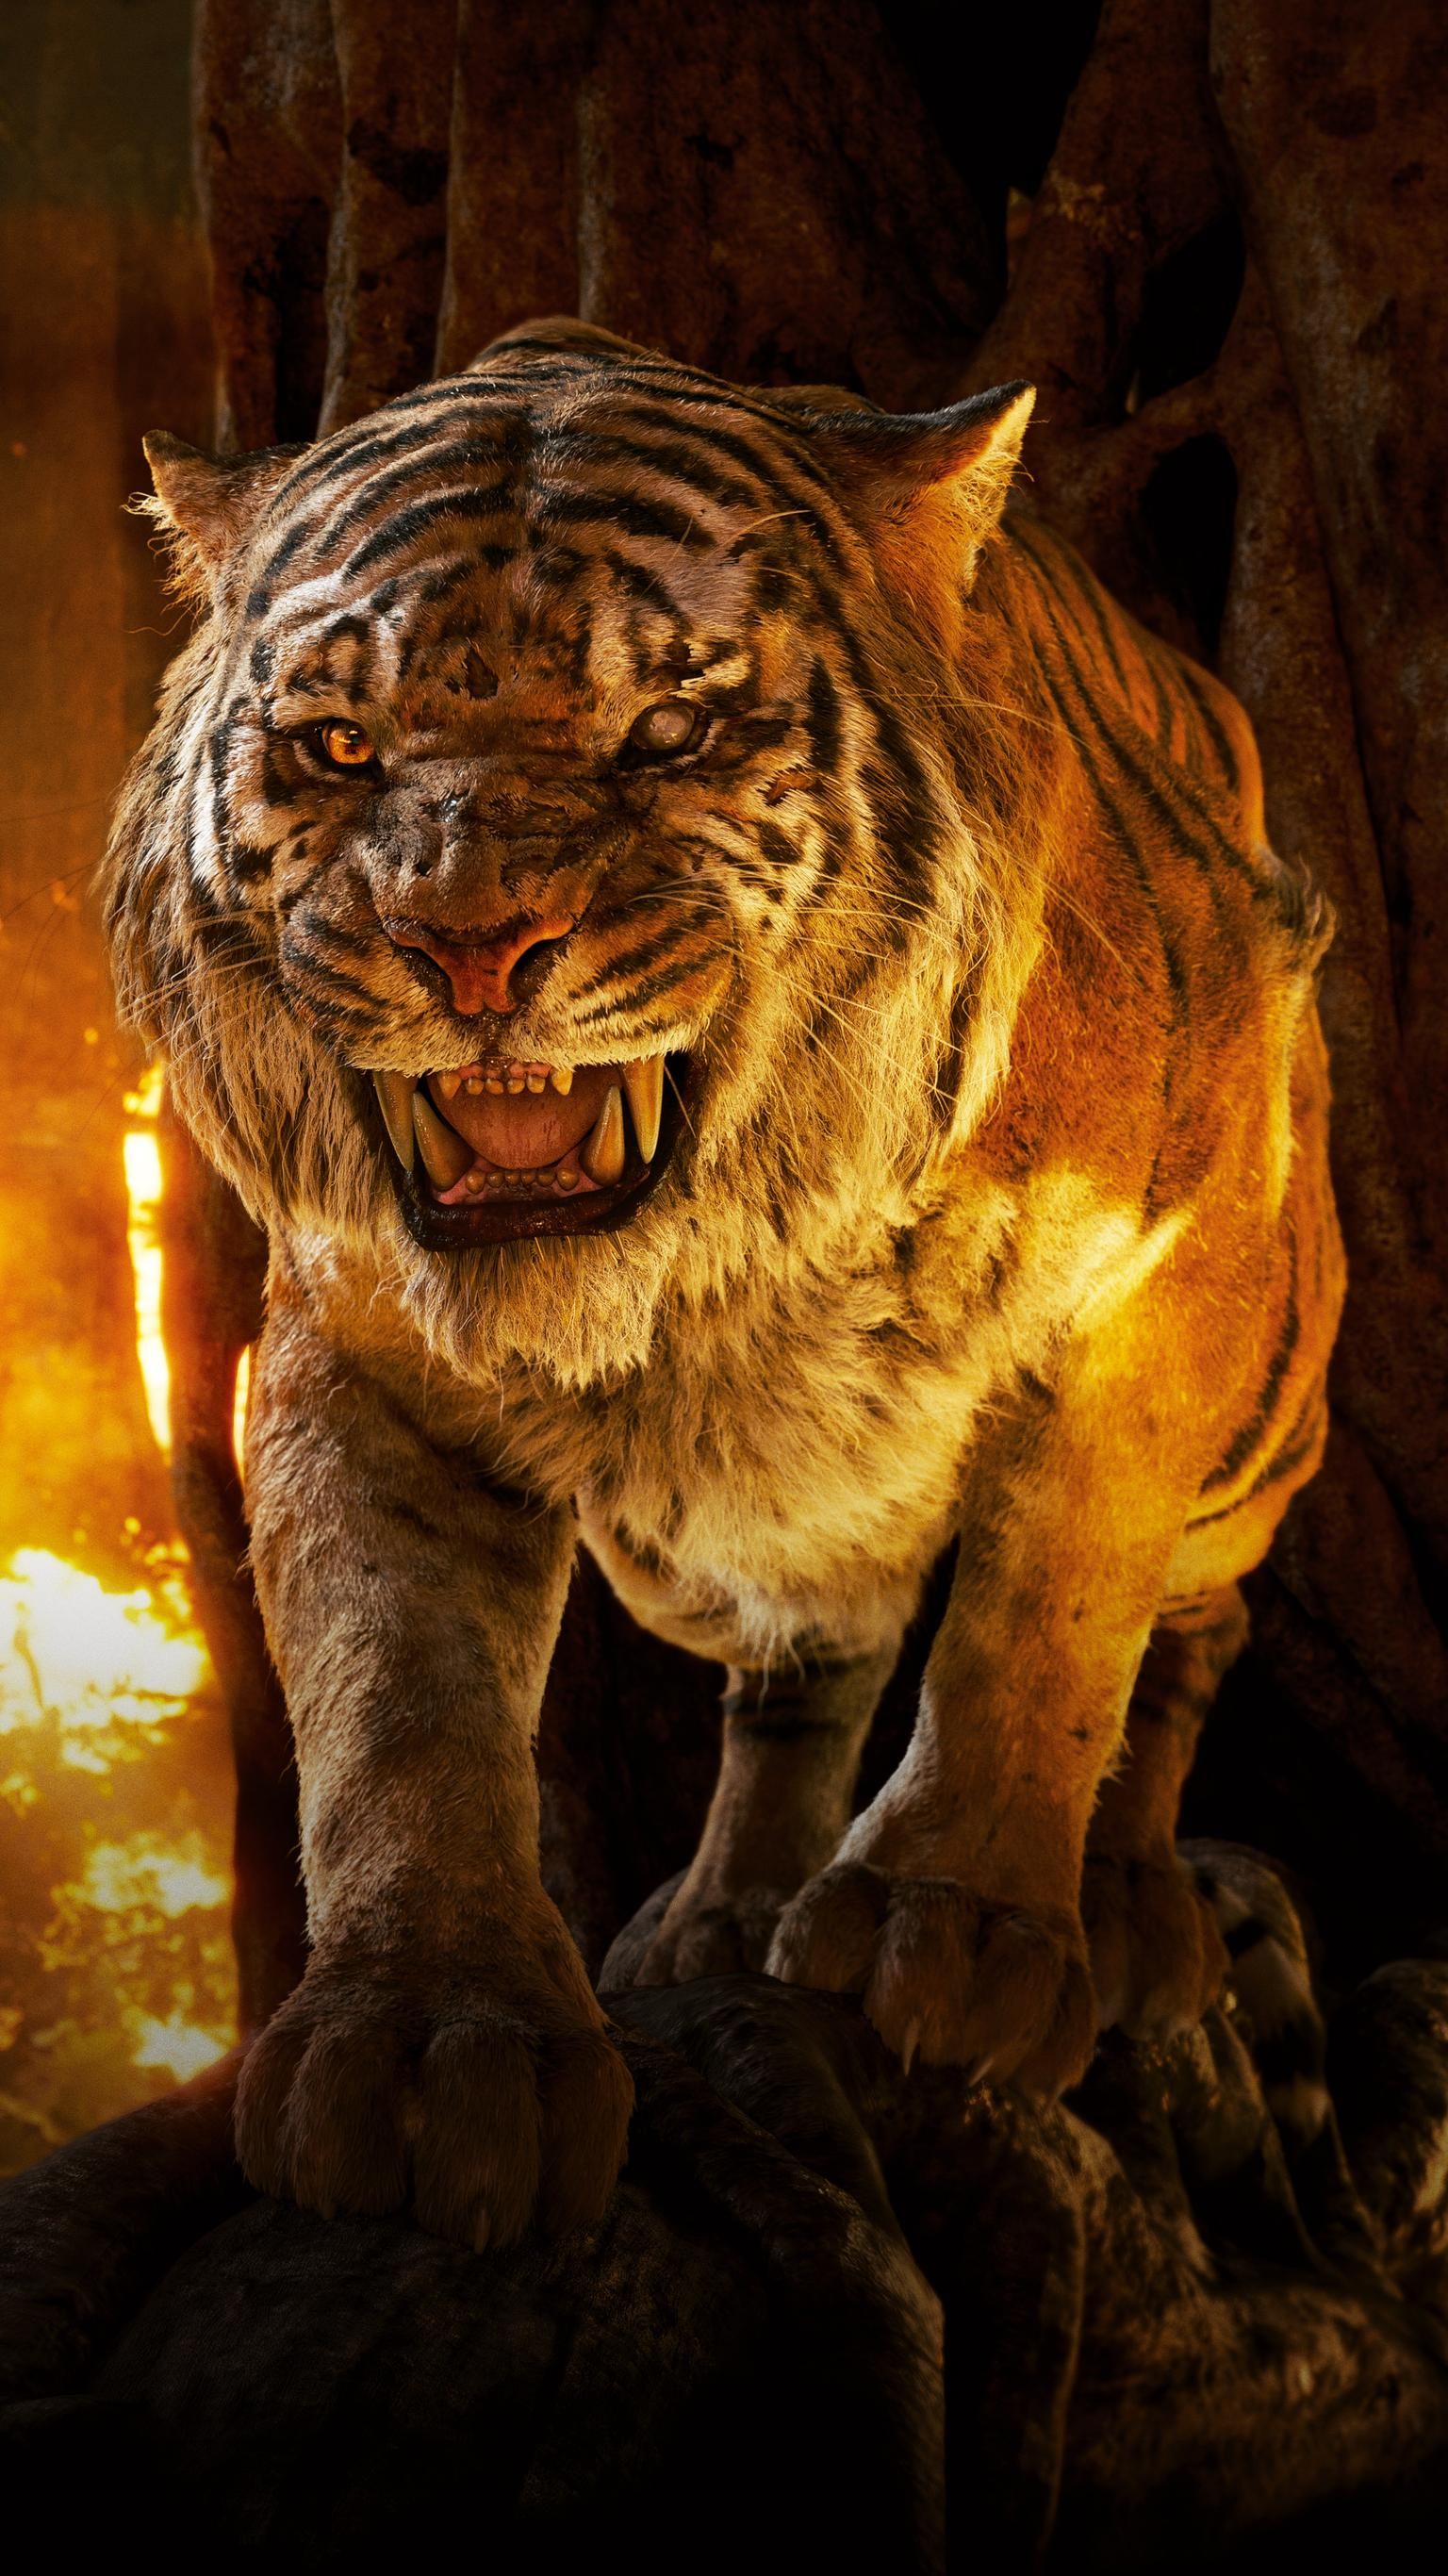 The Jungle Book Shere Khan Wallpapers